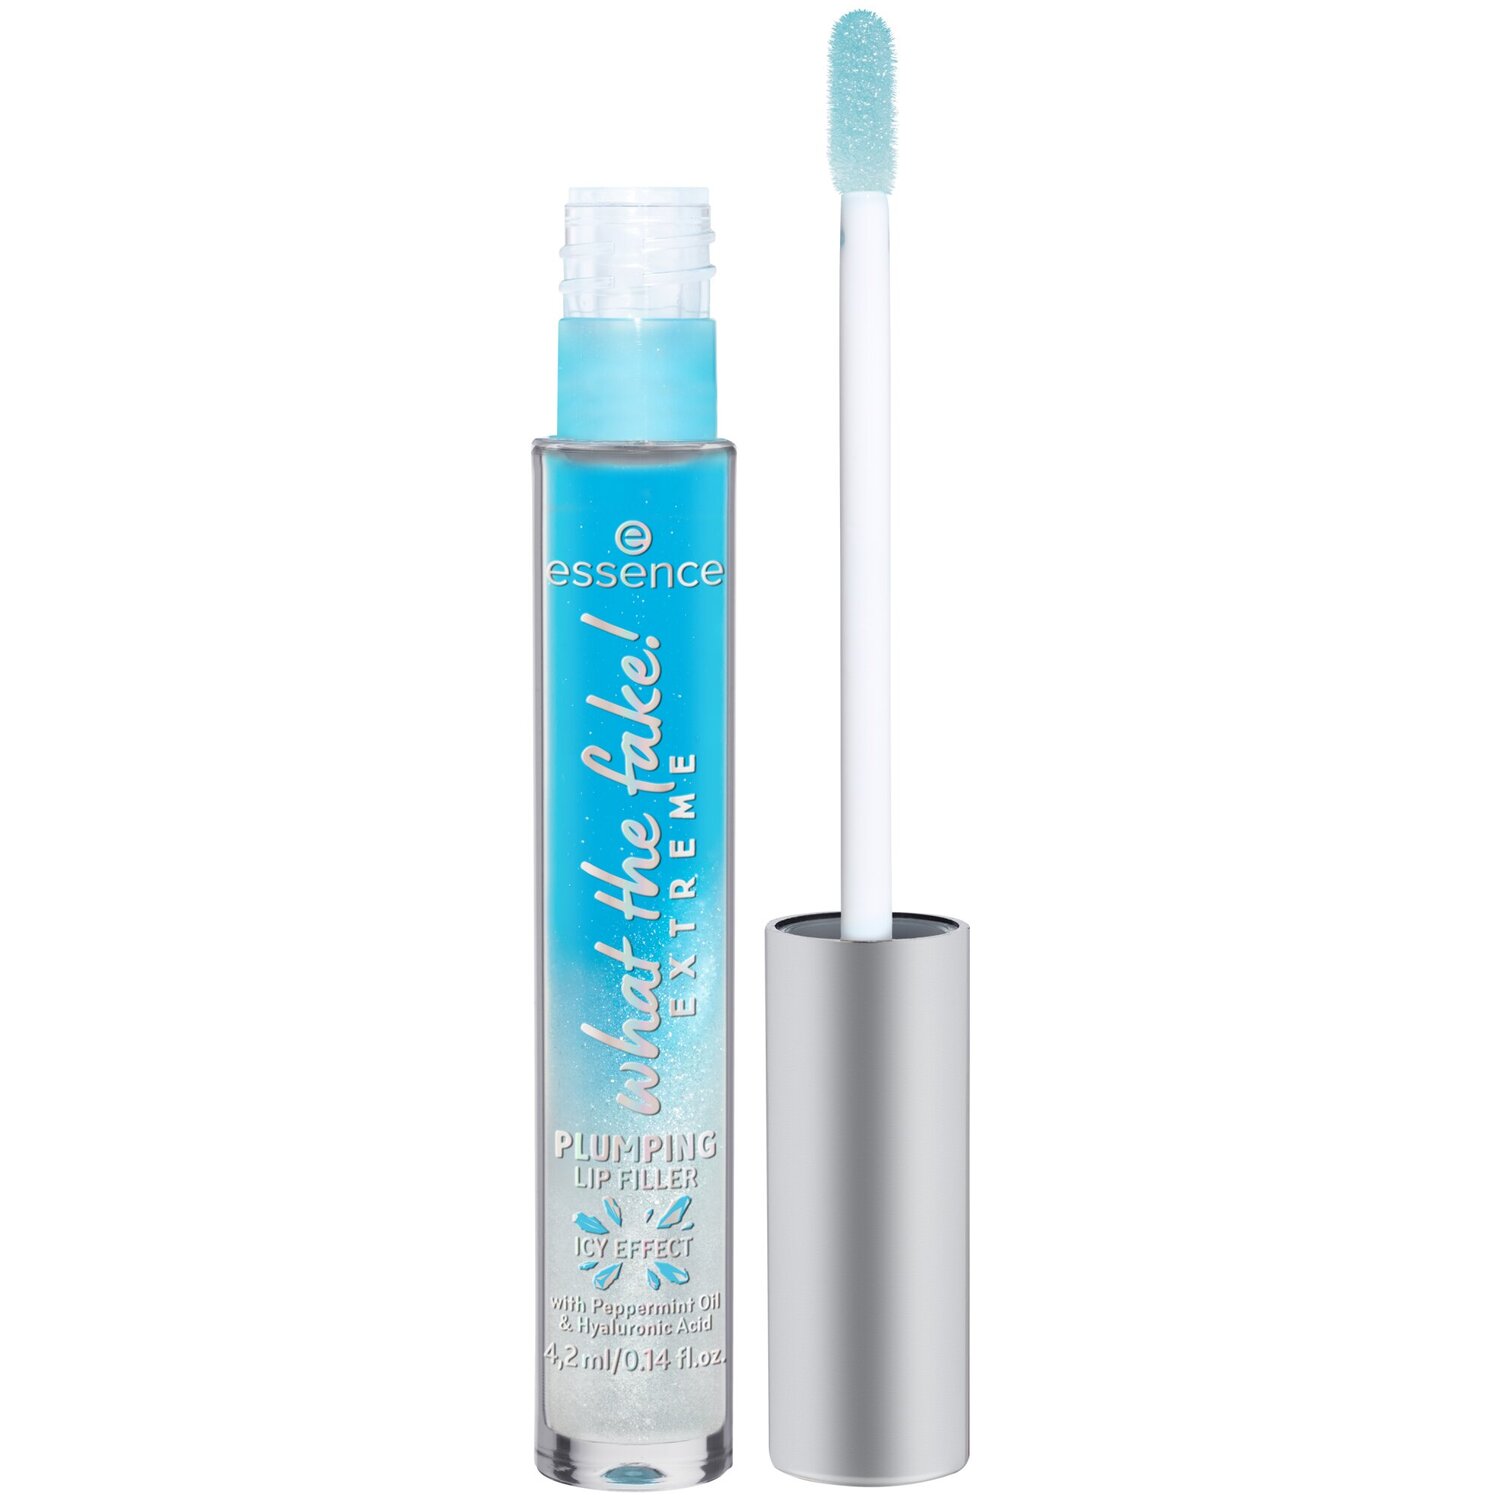 essence What the Fake Exteme Plumping Lip Filler - Peppermint Oil Image 1